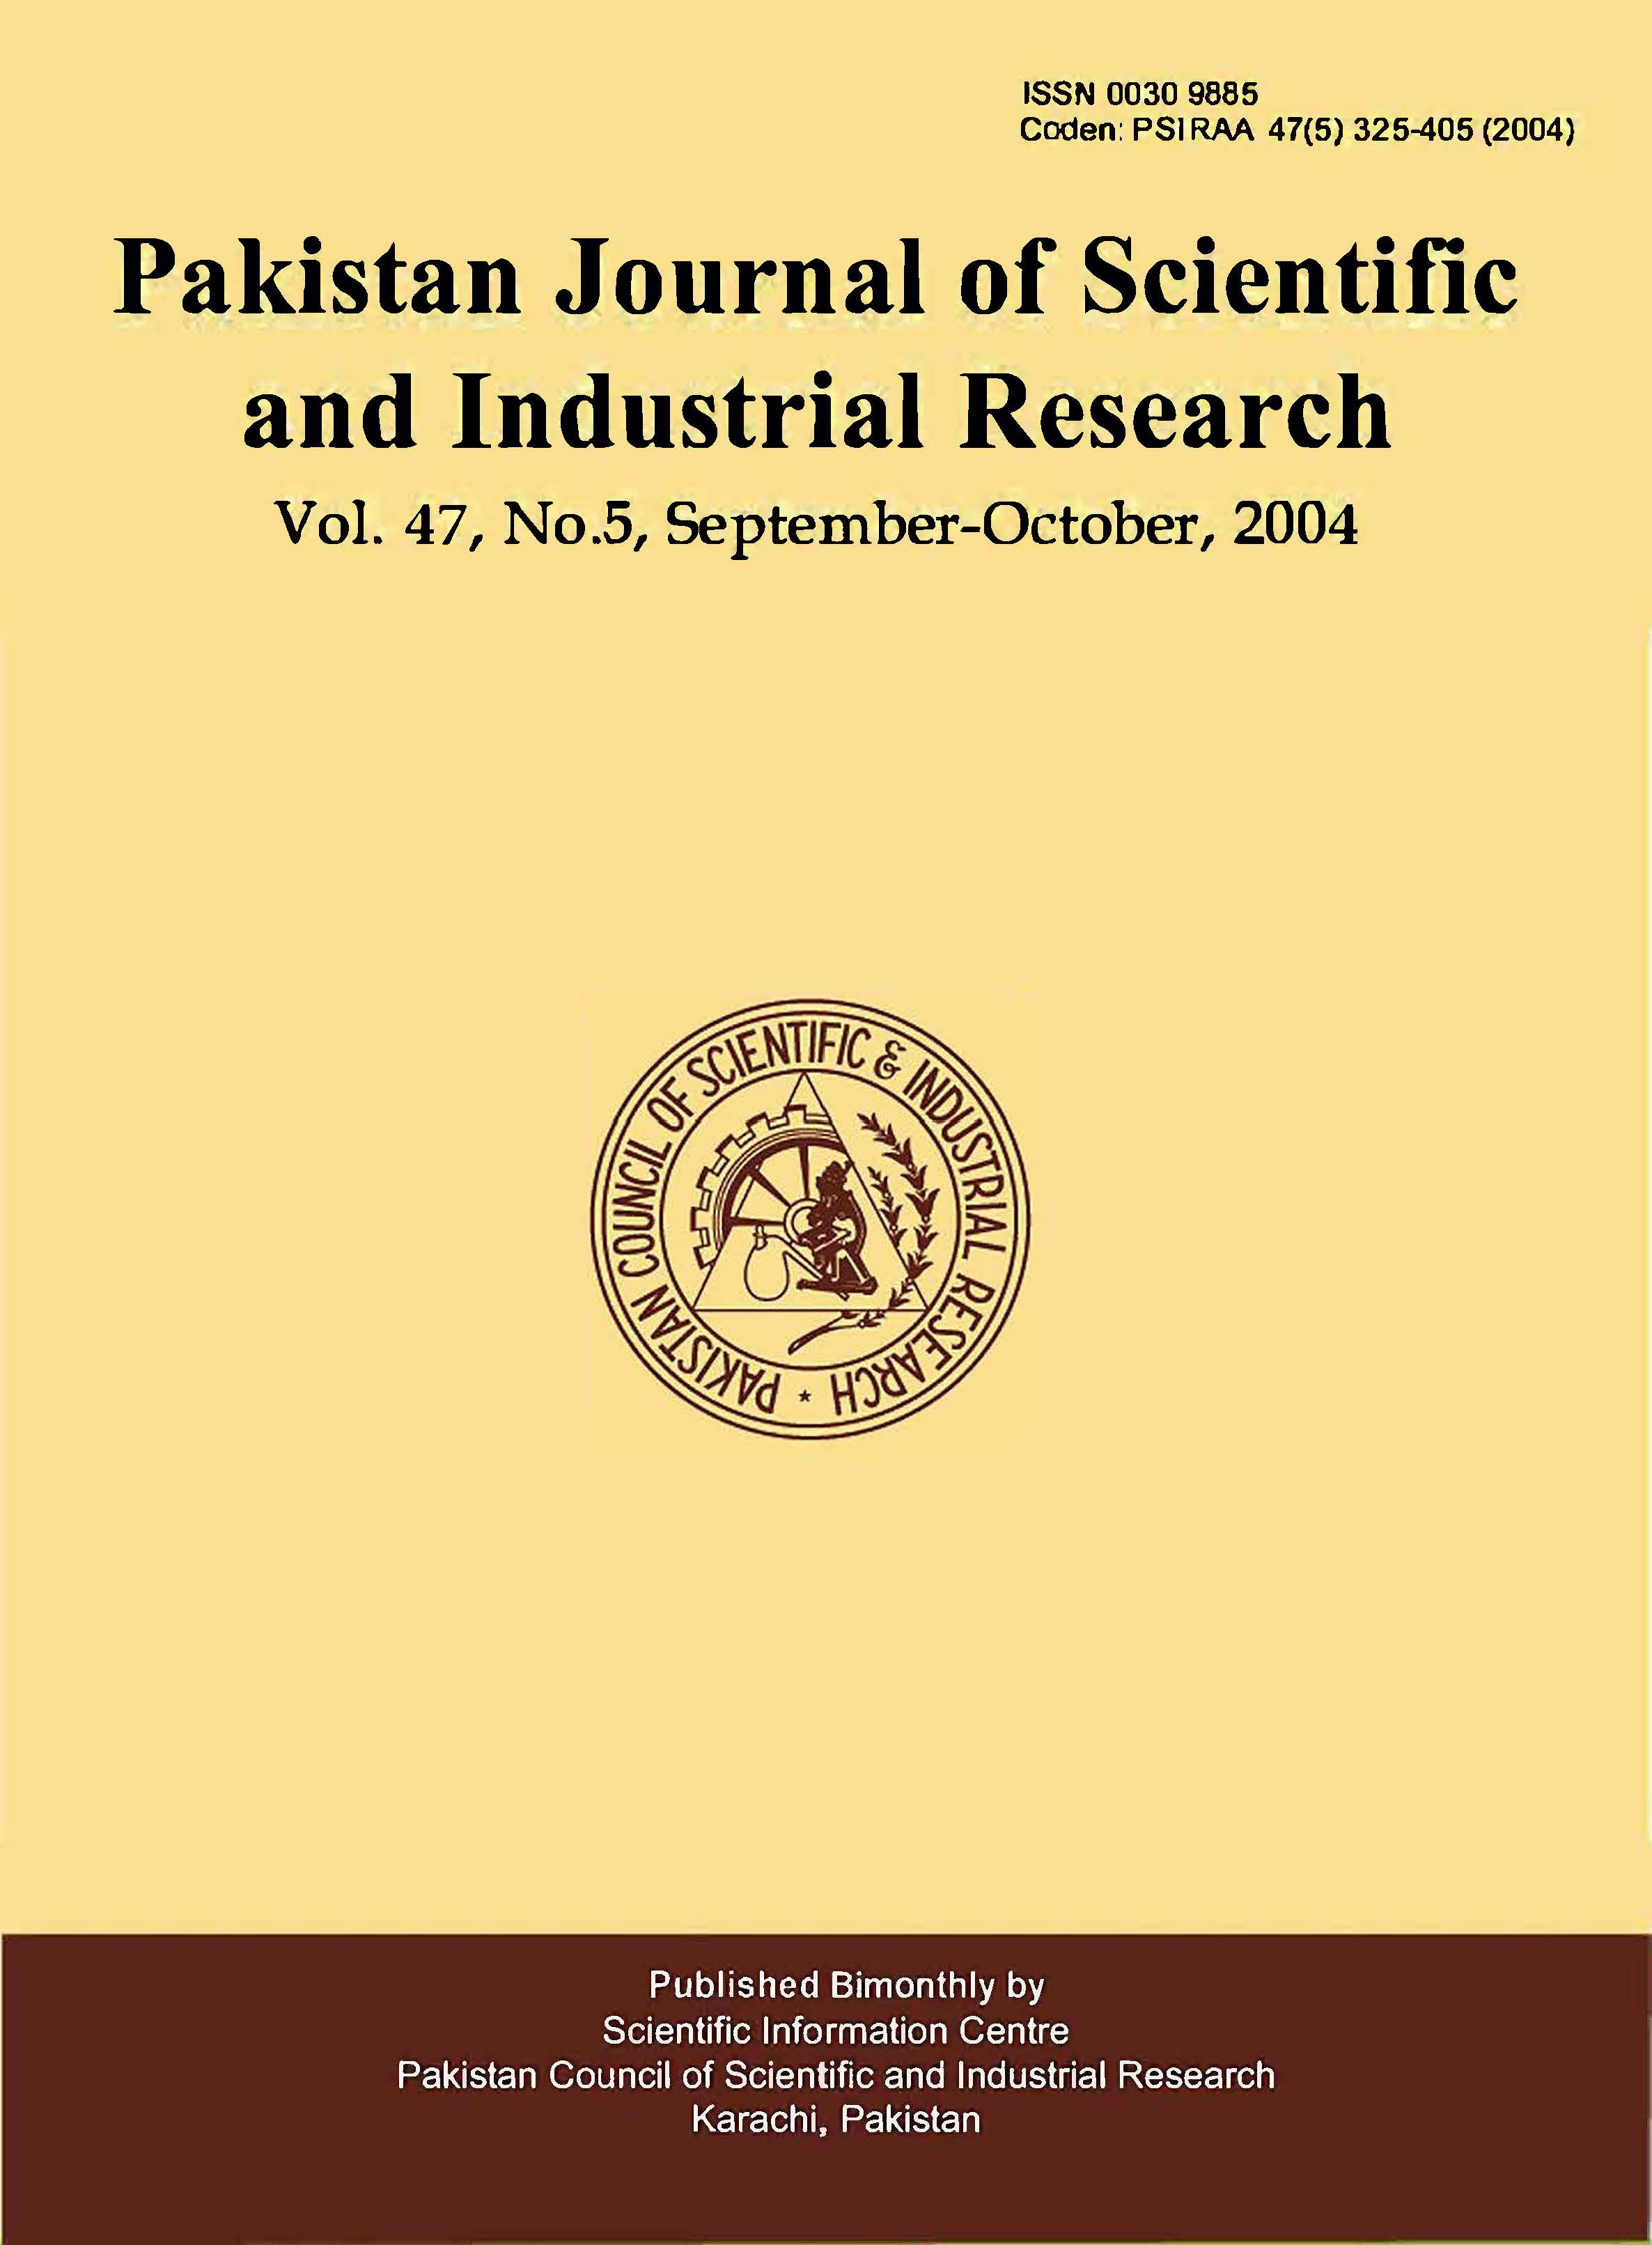 					View Vol. 47 No. 5 (2004): Pakistan Journal of Scientific and Industrial Research
				